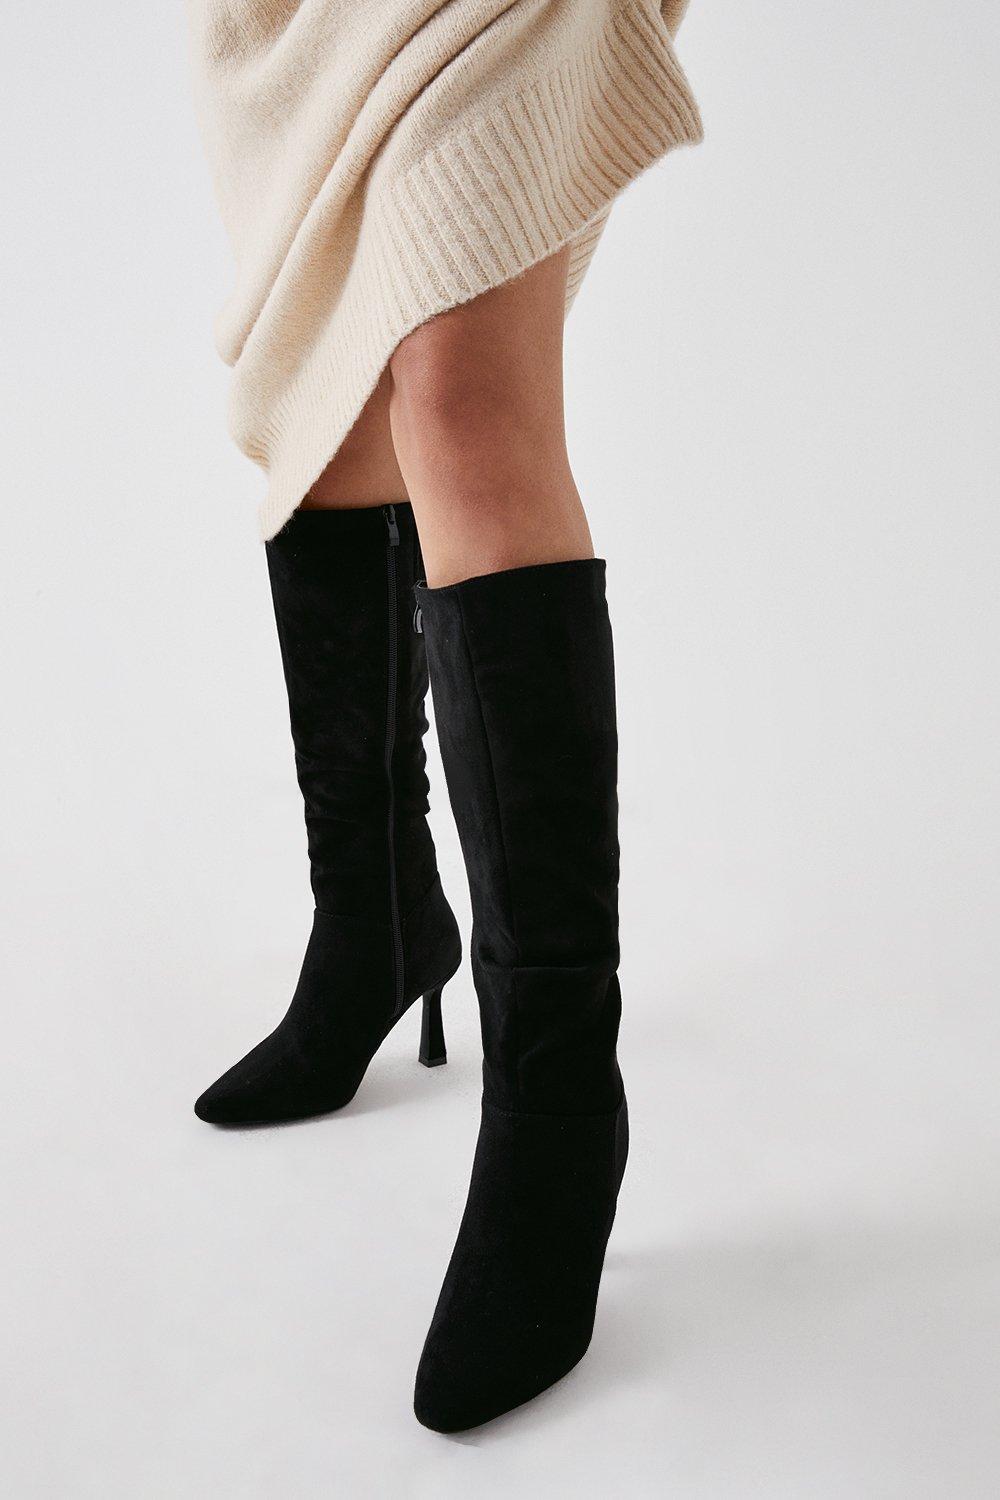 Women’s Kristina Knee High Pointed Ruched Boots - natural black - 3